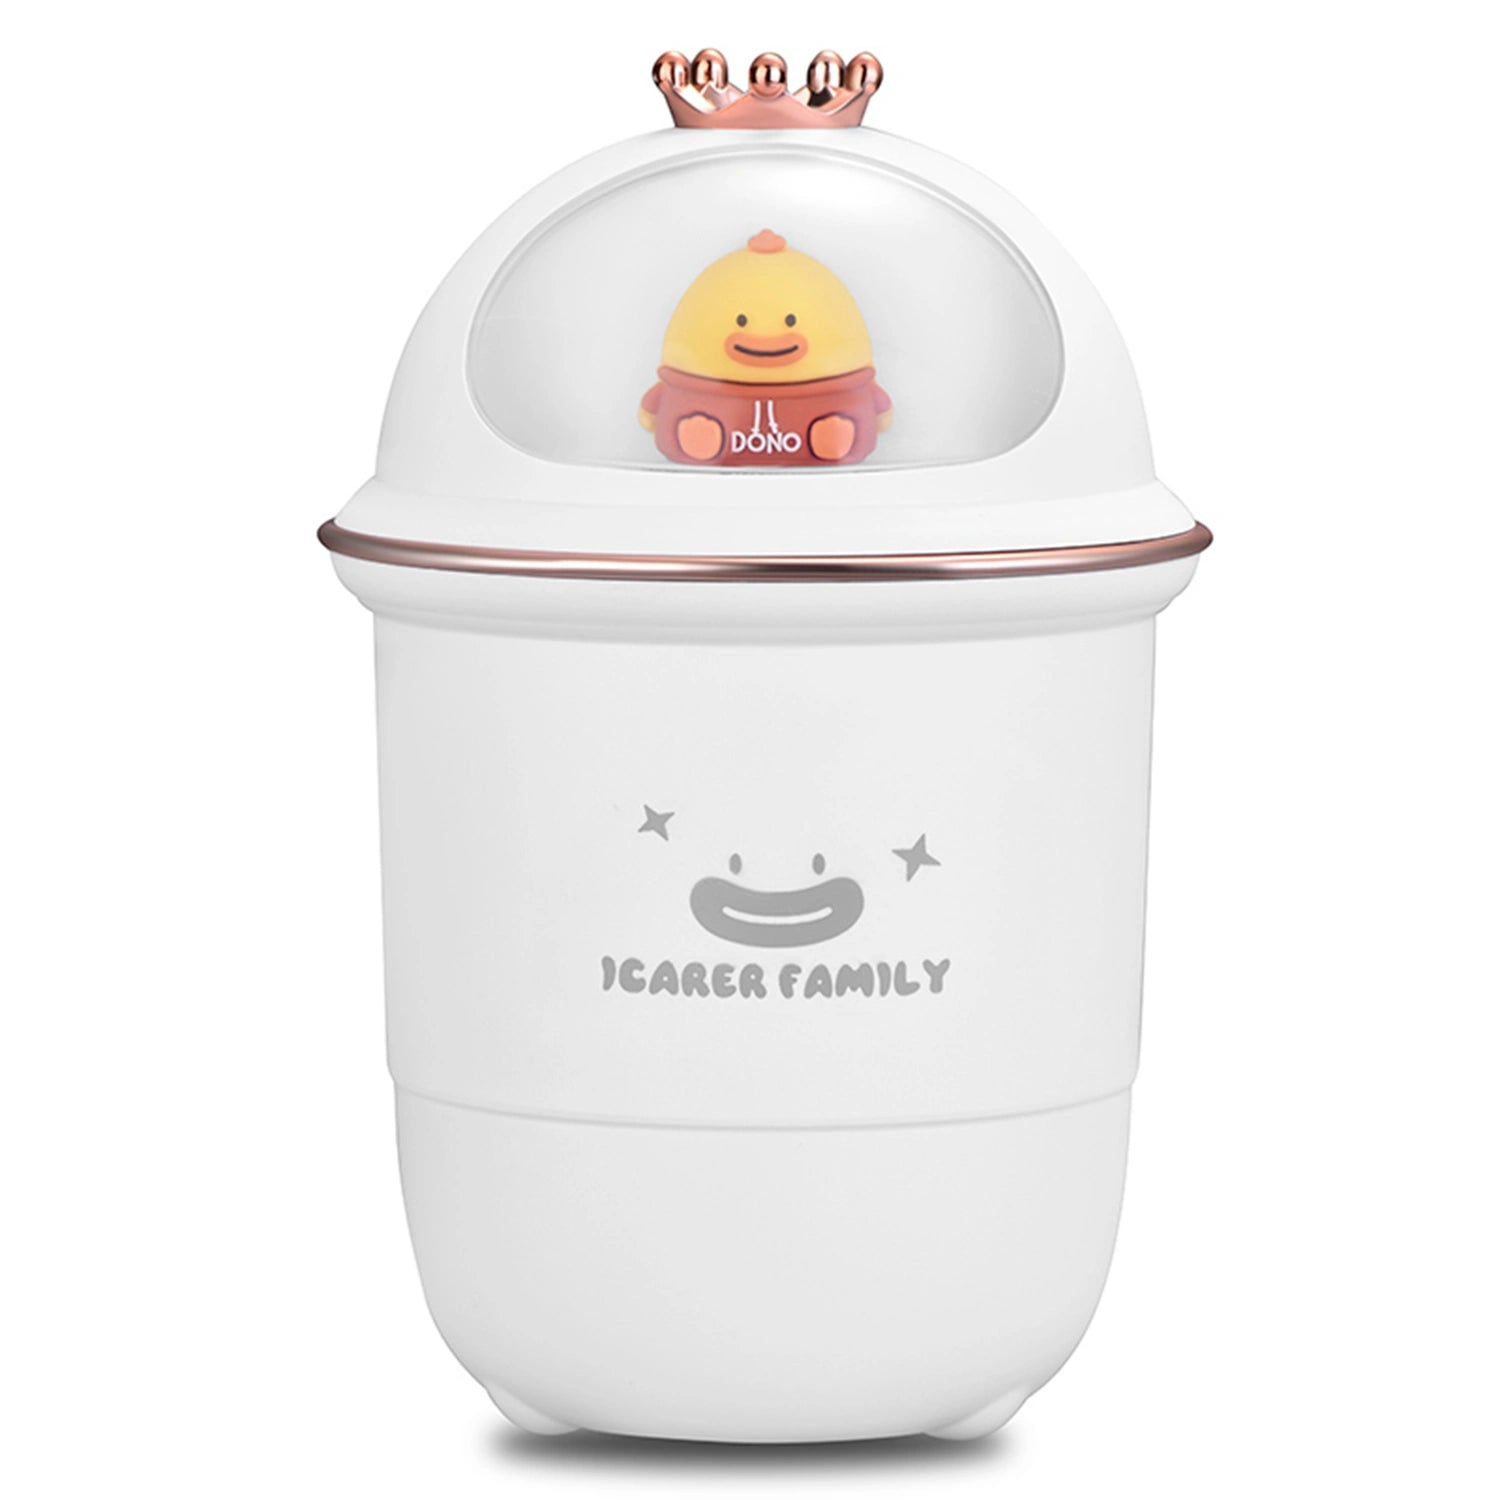 iCarer Family® Imperial Crown Shape Air Humidifier Small Humidifier Silent USB Desktop Car Mini Humidifier